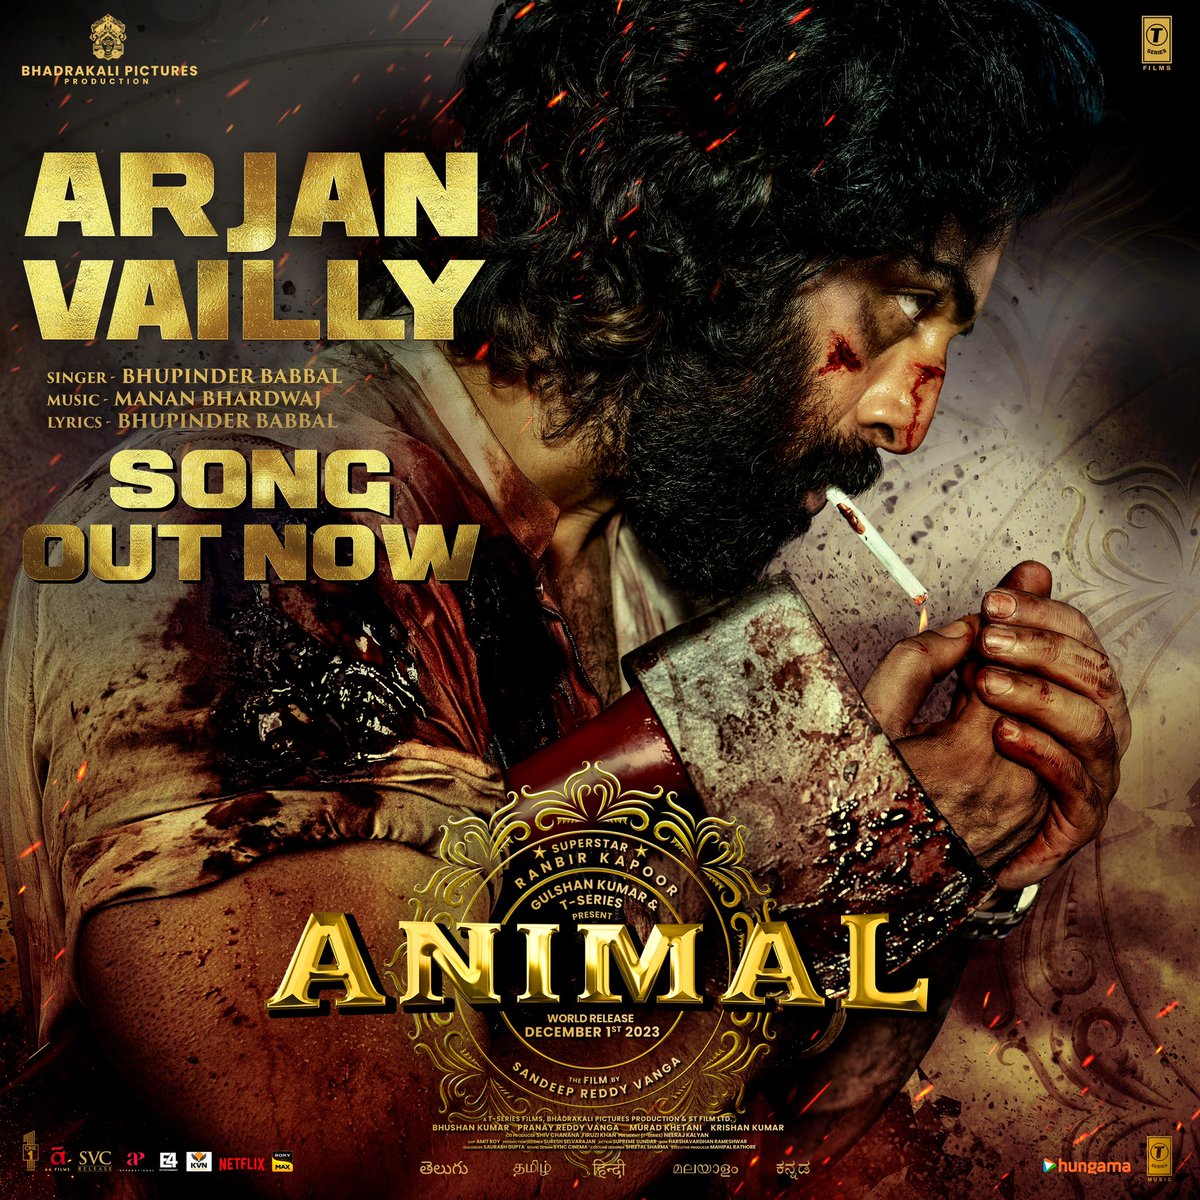 Had been seeing and hearing a lot of requests for #ArjanVailly and we’ve hence planned to release it for you before the release of the film.. ❤️ #ArjanVailly full audio out now bit.ly/ArjanVailly-Fu… @AnimalTheFilm #Animal4thSong #Animal #AnimalOn1stDec #AnimalTheFilm…